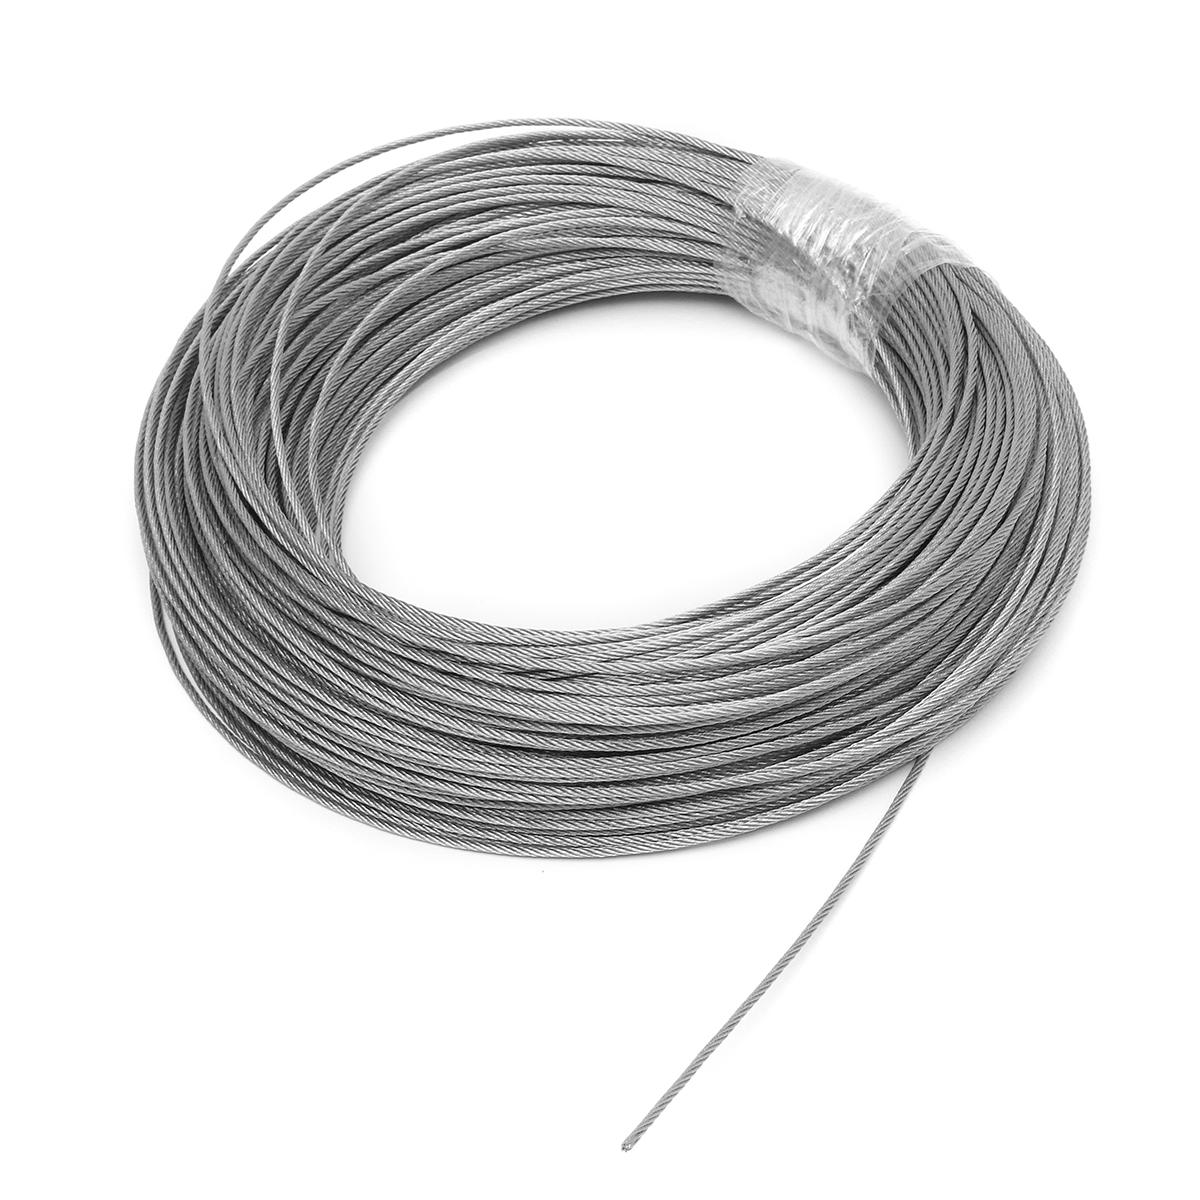 Steel wire rope sling left hand or right hand lay